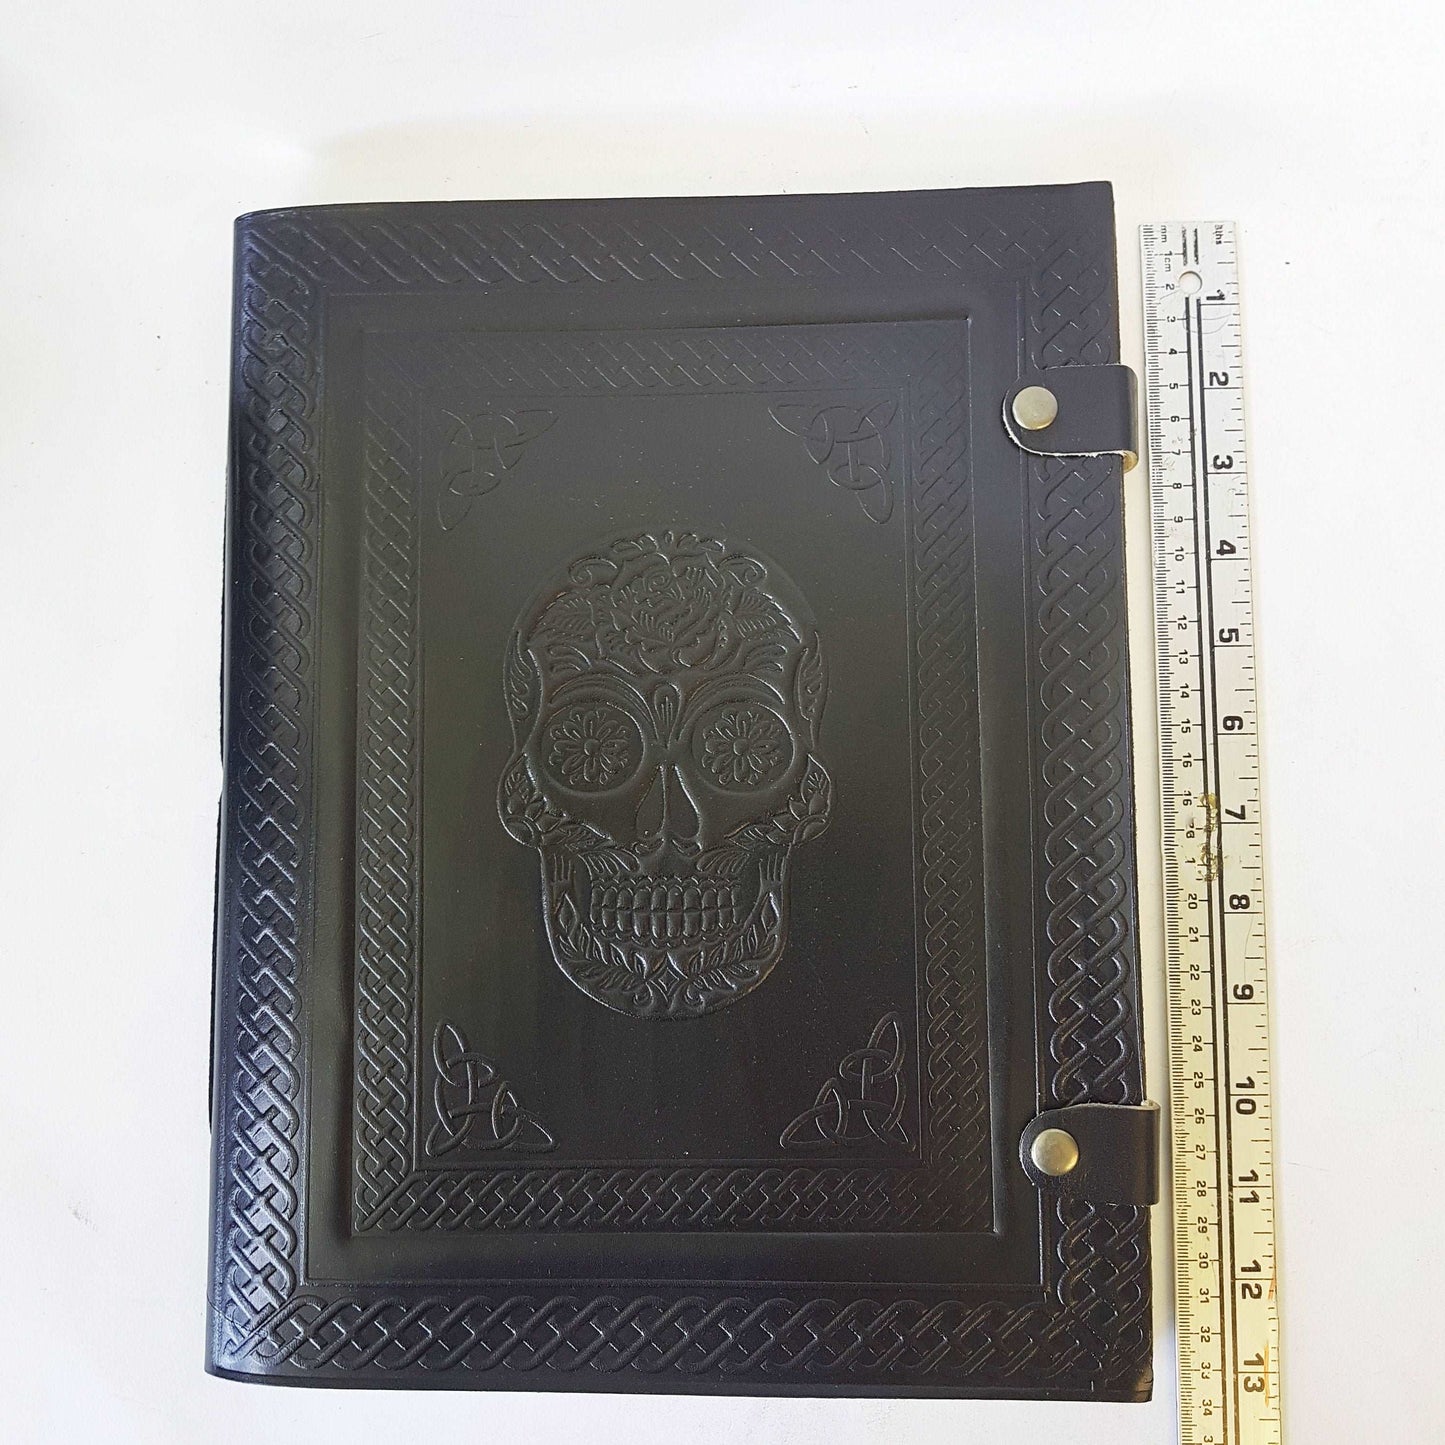 Black leather skull journal. Large album with blank pages. Use as sketchbook, diary, book of shadows. Halloween-wiccan-pagan theme gift. - Vintage India Ca